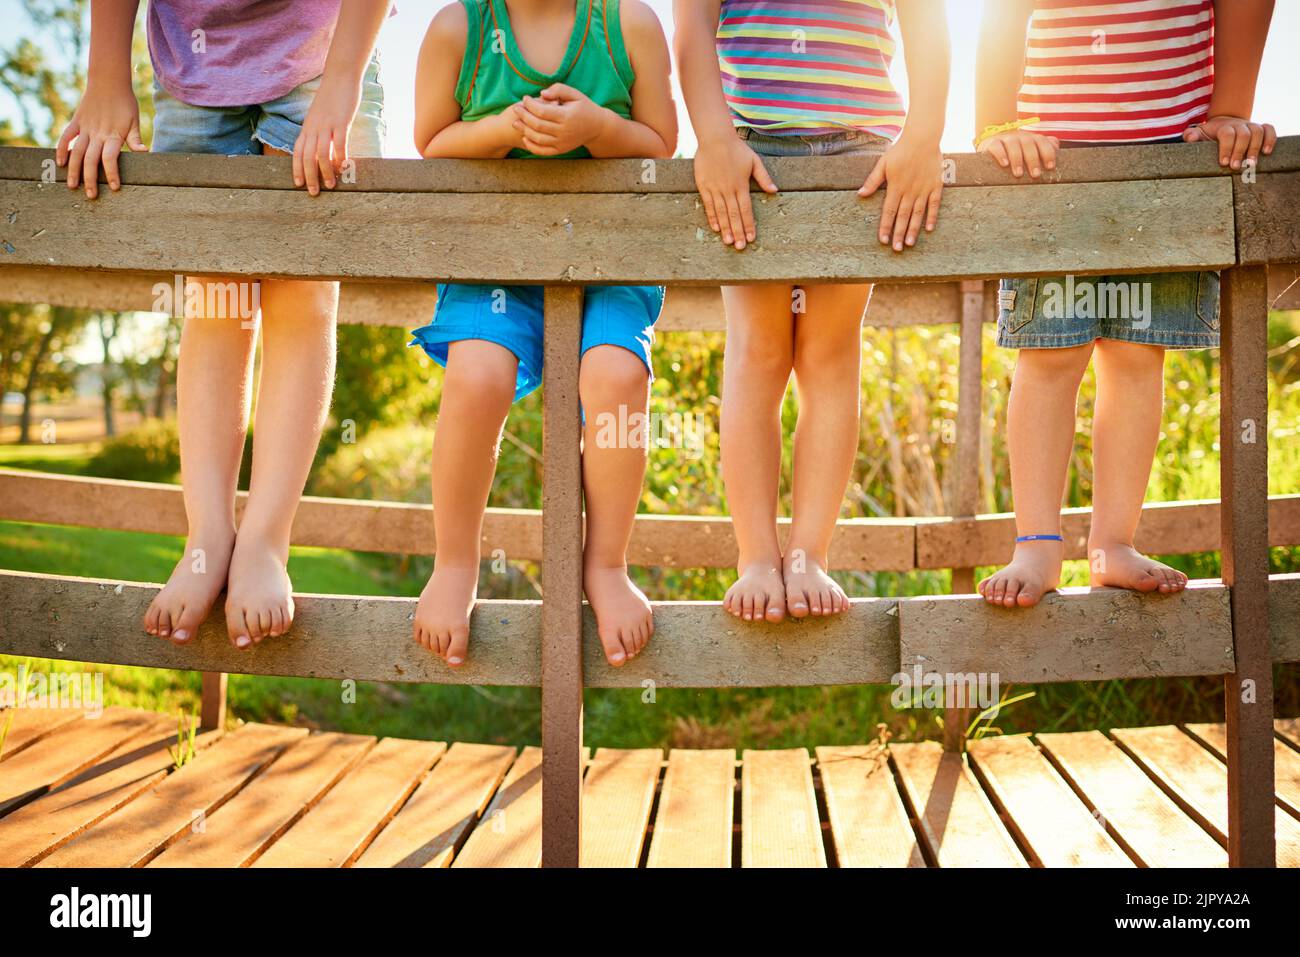 The innocence and fun of childhood. little kids playing outdoors. Stock Photo